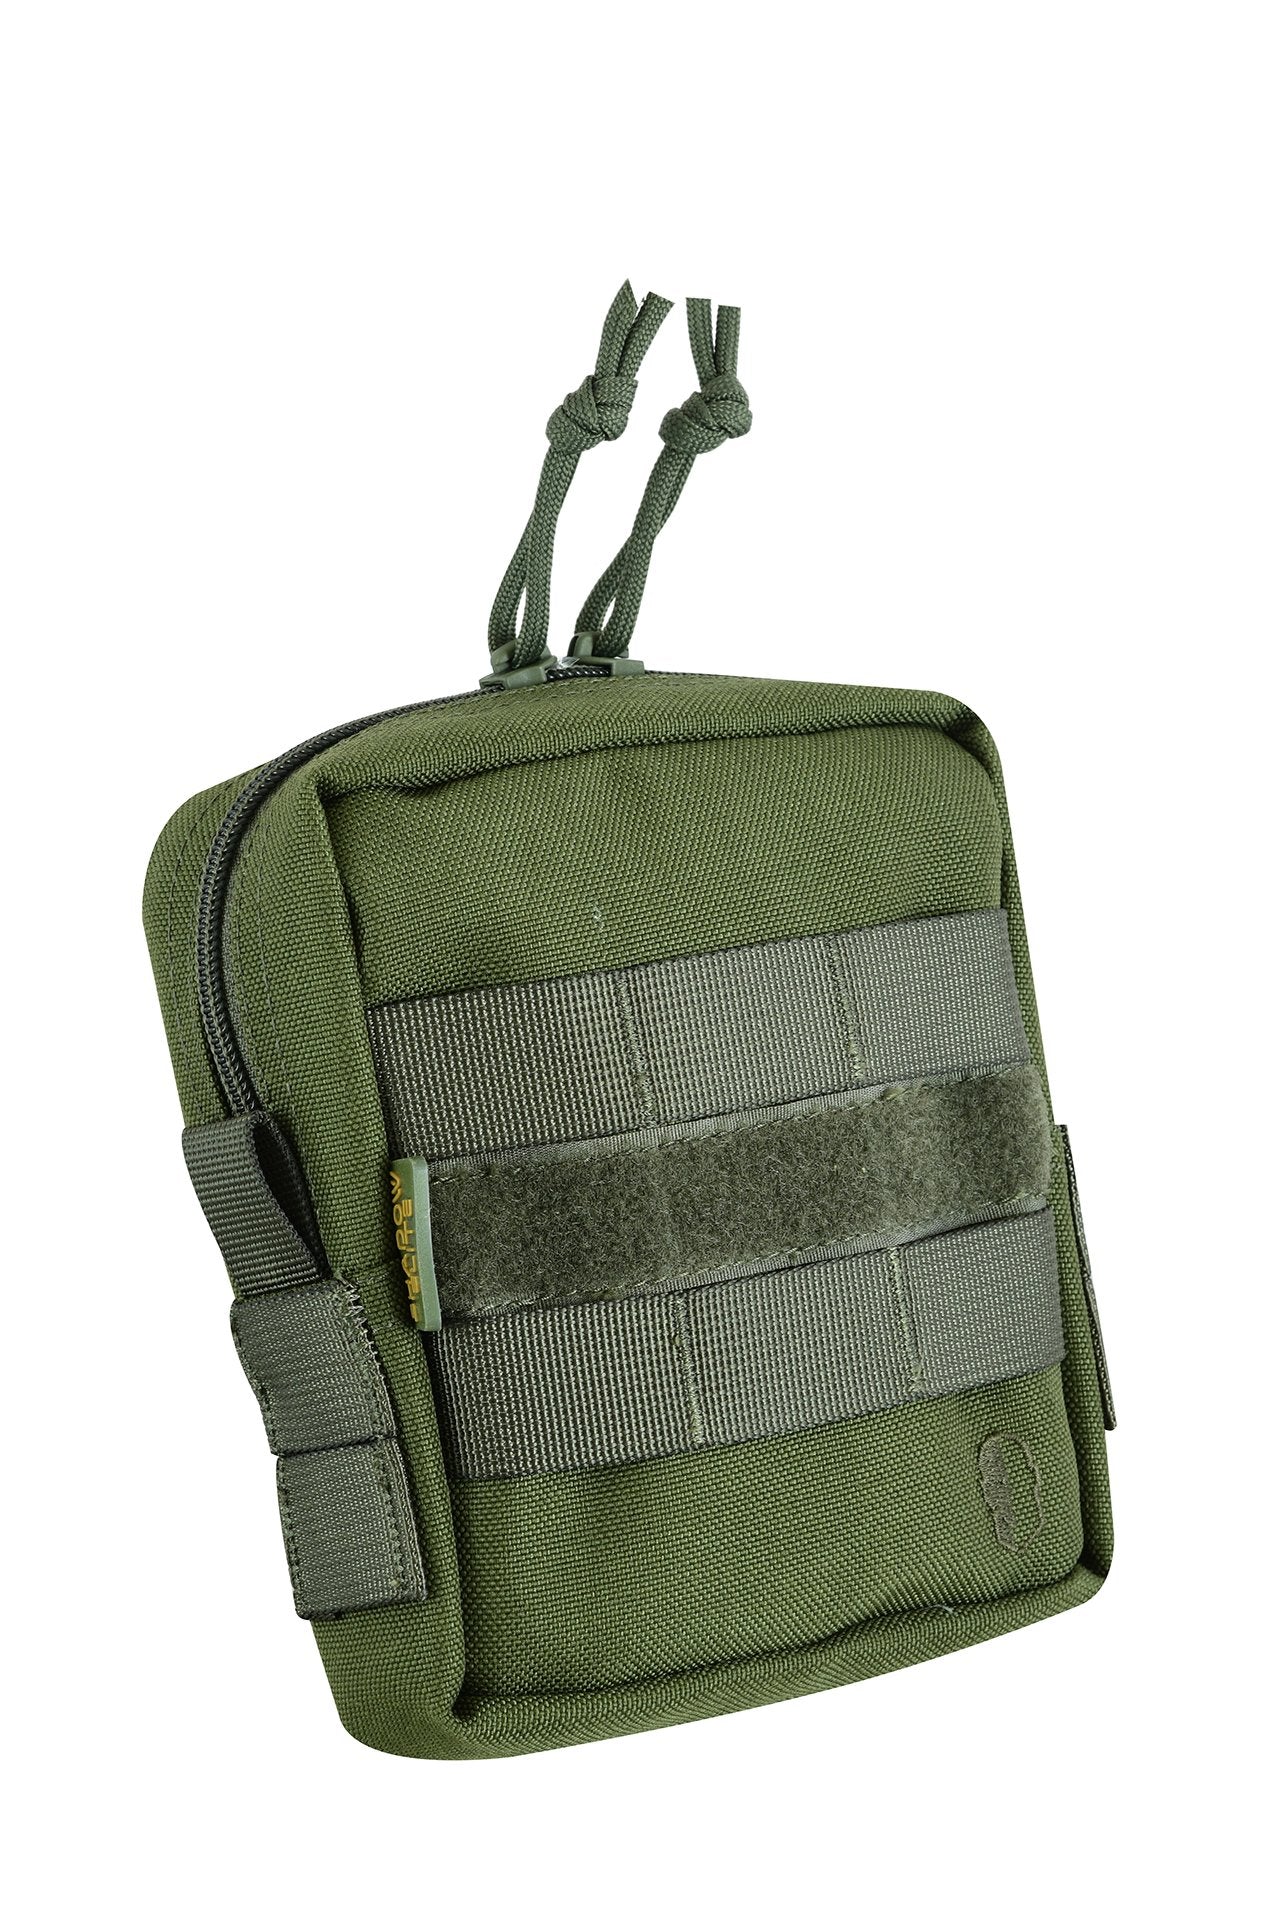 SHE-23033 SMALL  UTILITY  POUCH OLIVE GREEN